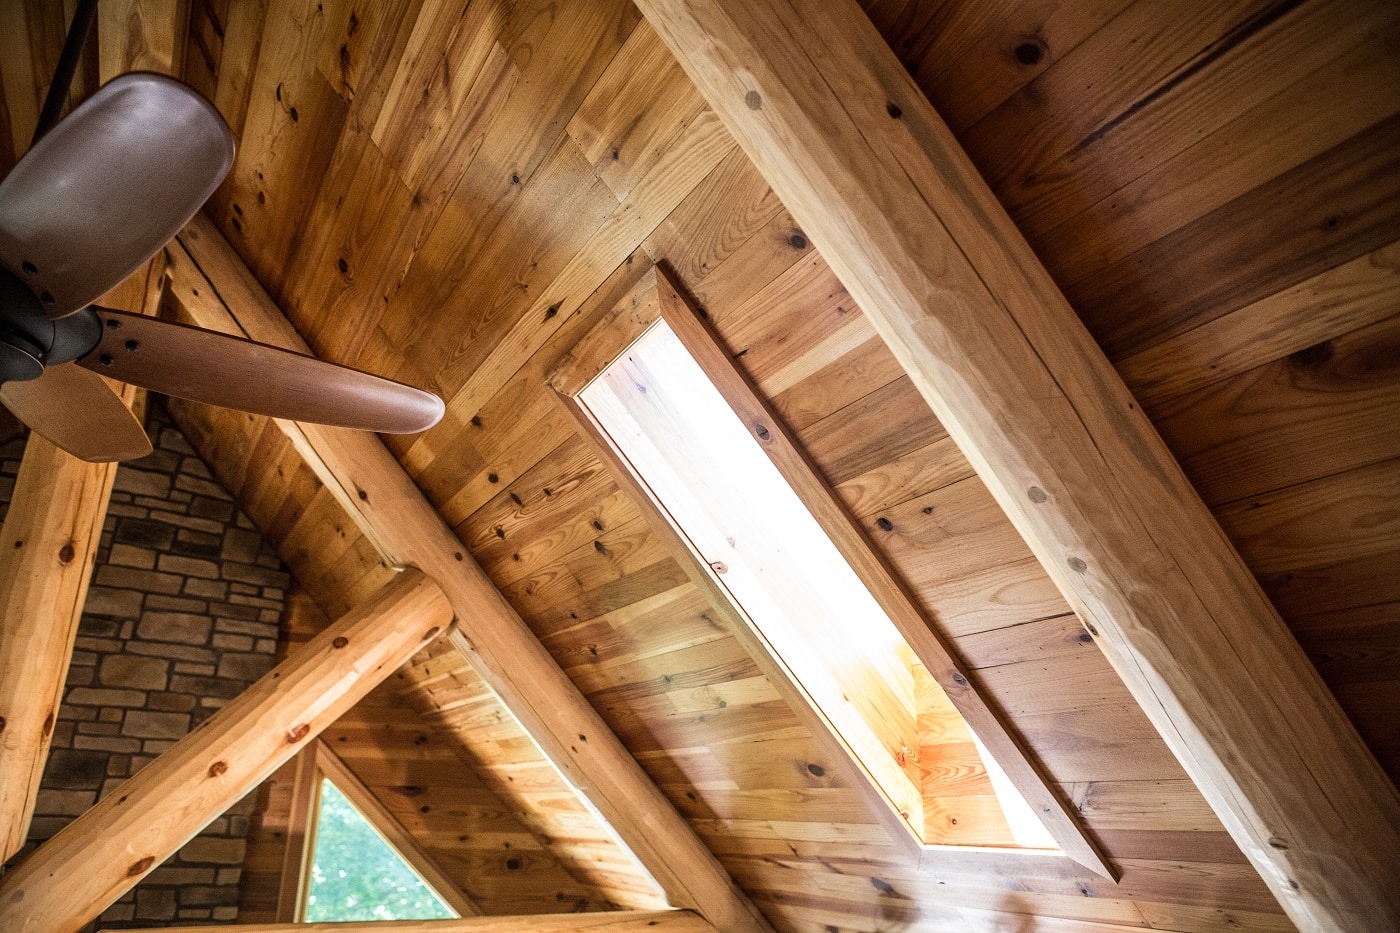 Skylight in a cabin-style home